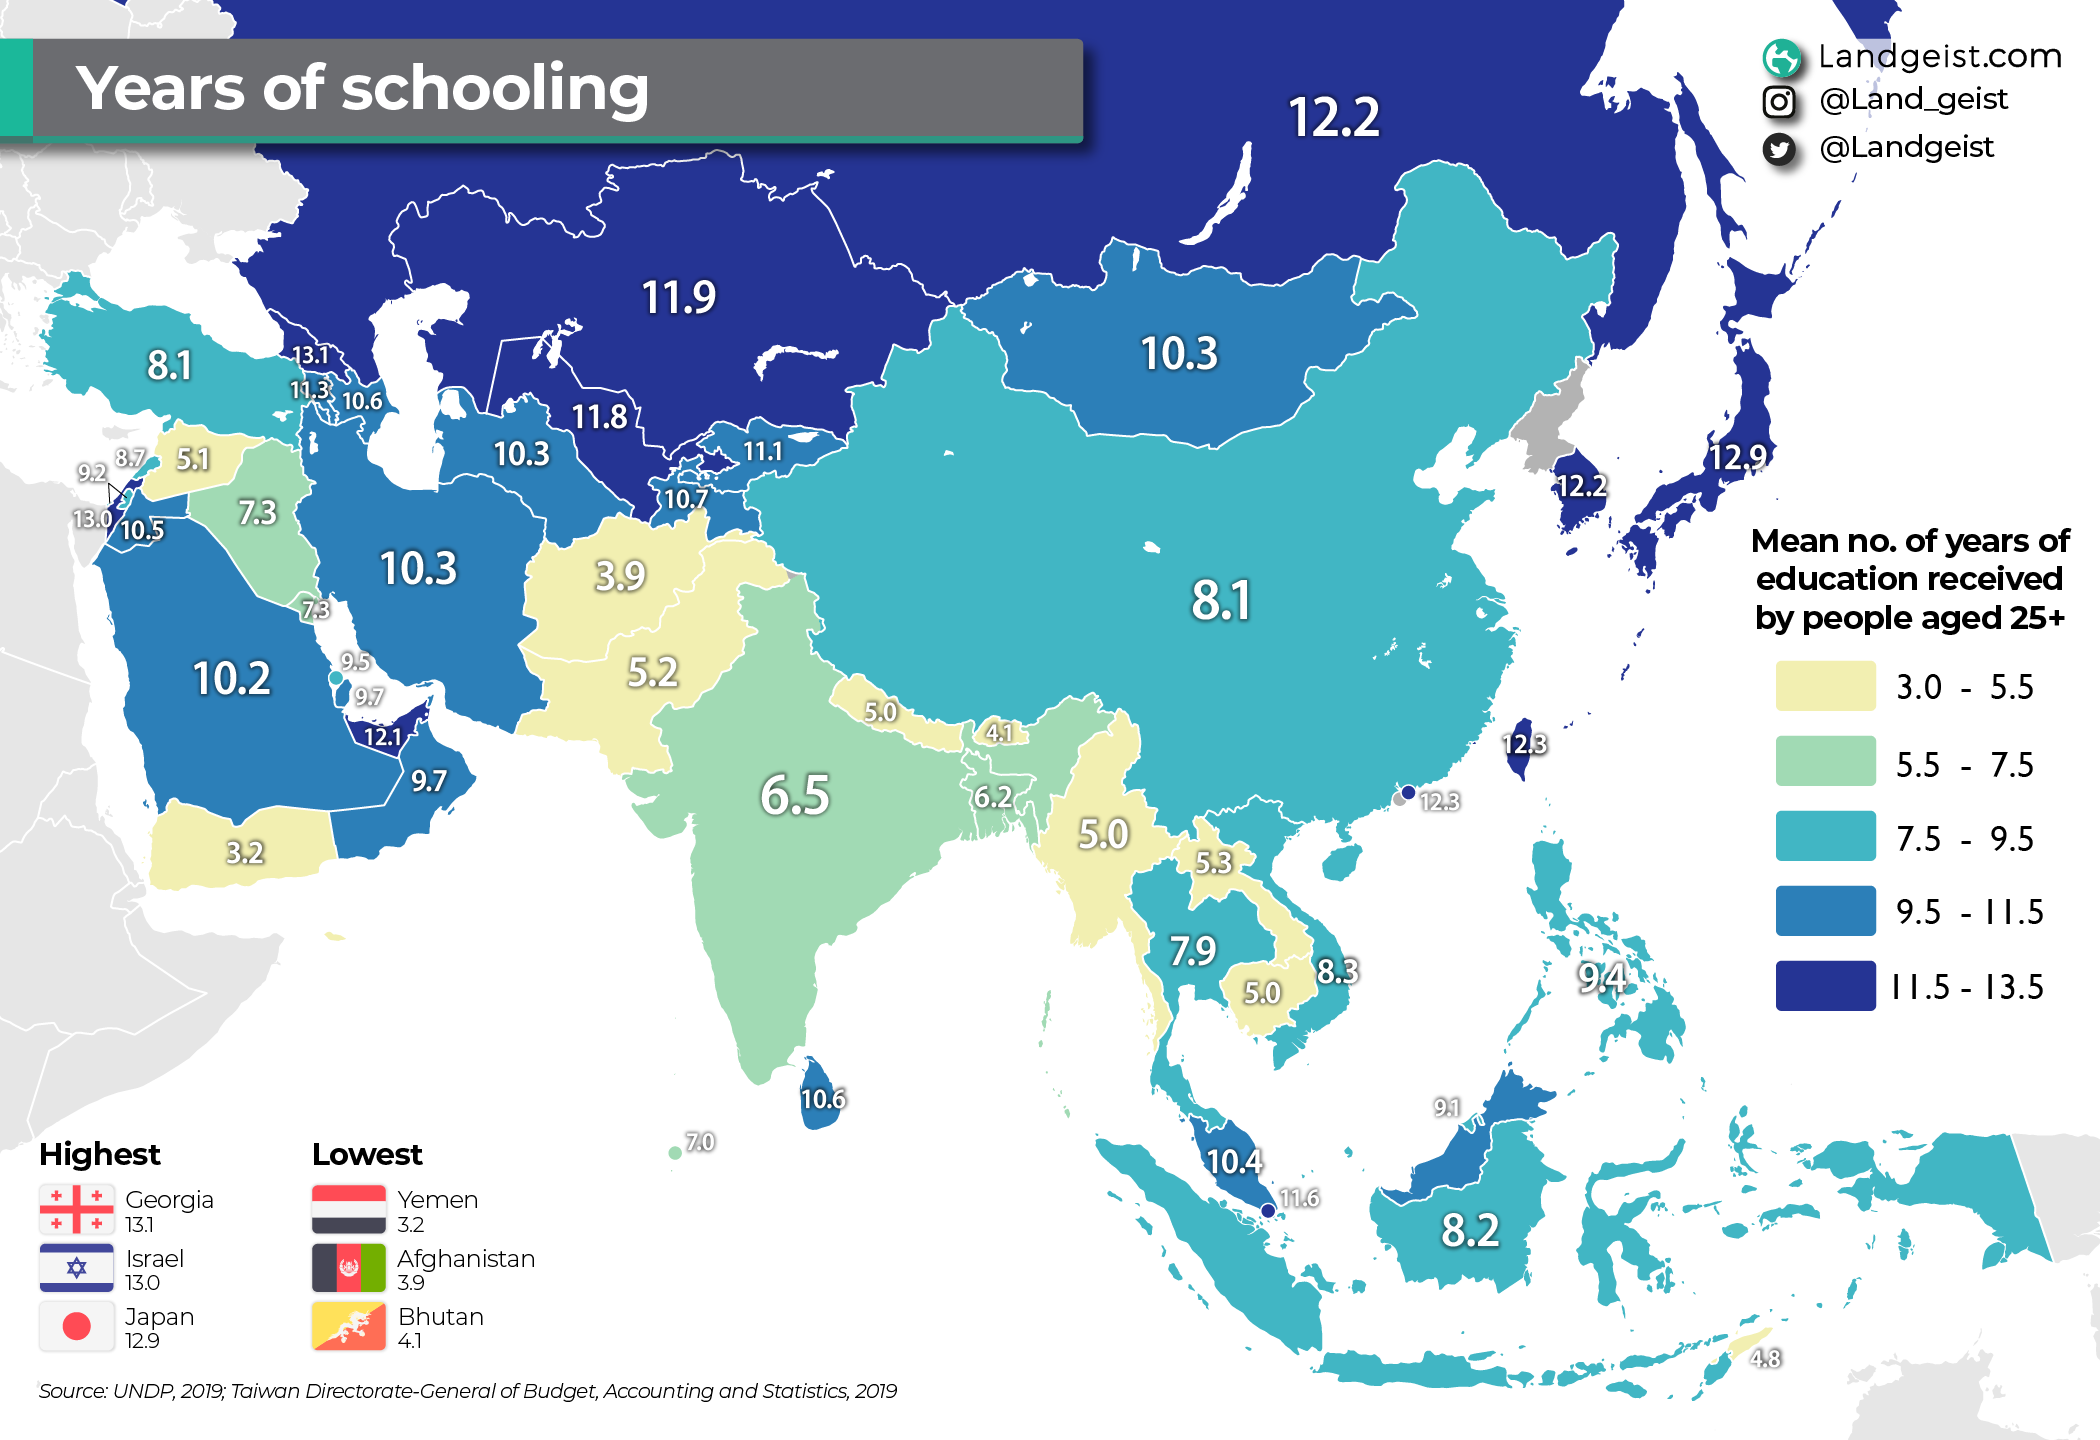 Map of the mean years of schooling in Asia.